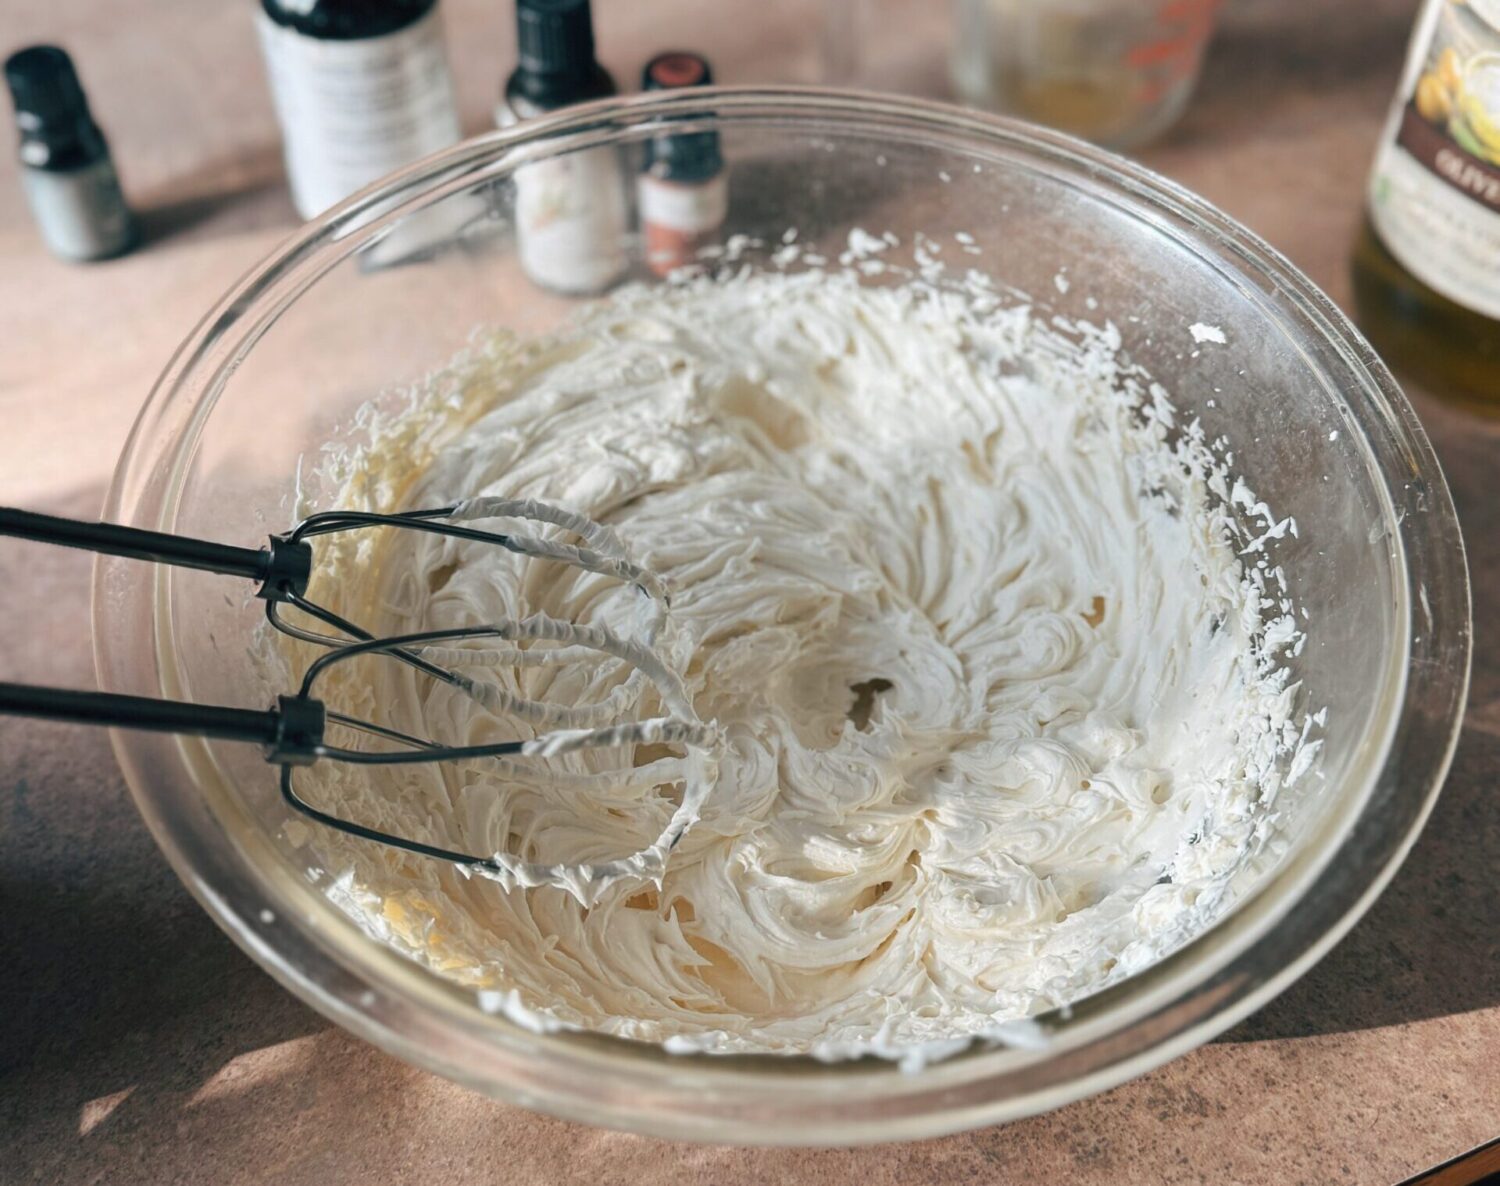 A photo showing a hand mixer whipping up tallow balm with essential oil bottles in the background.